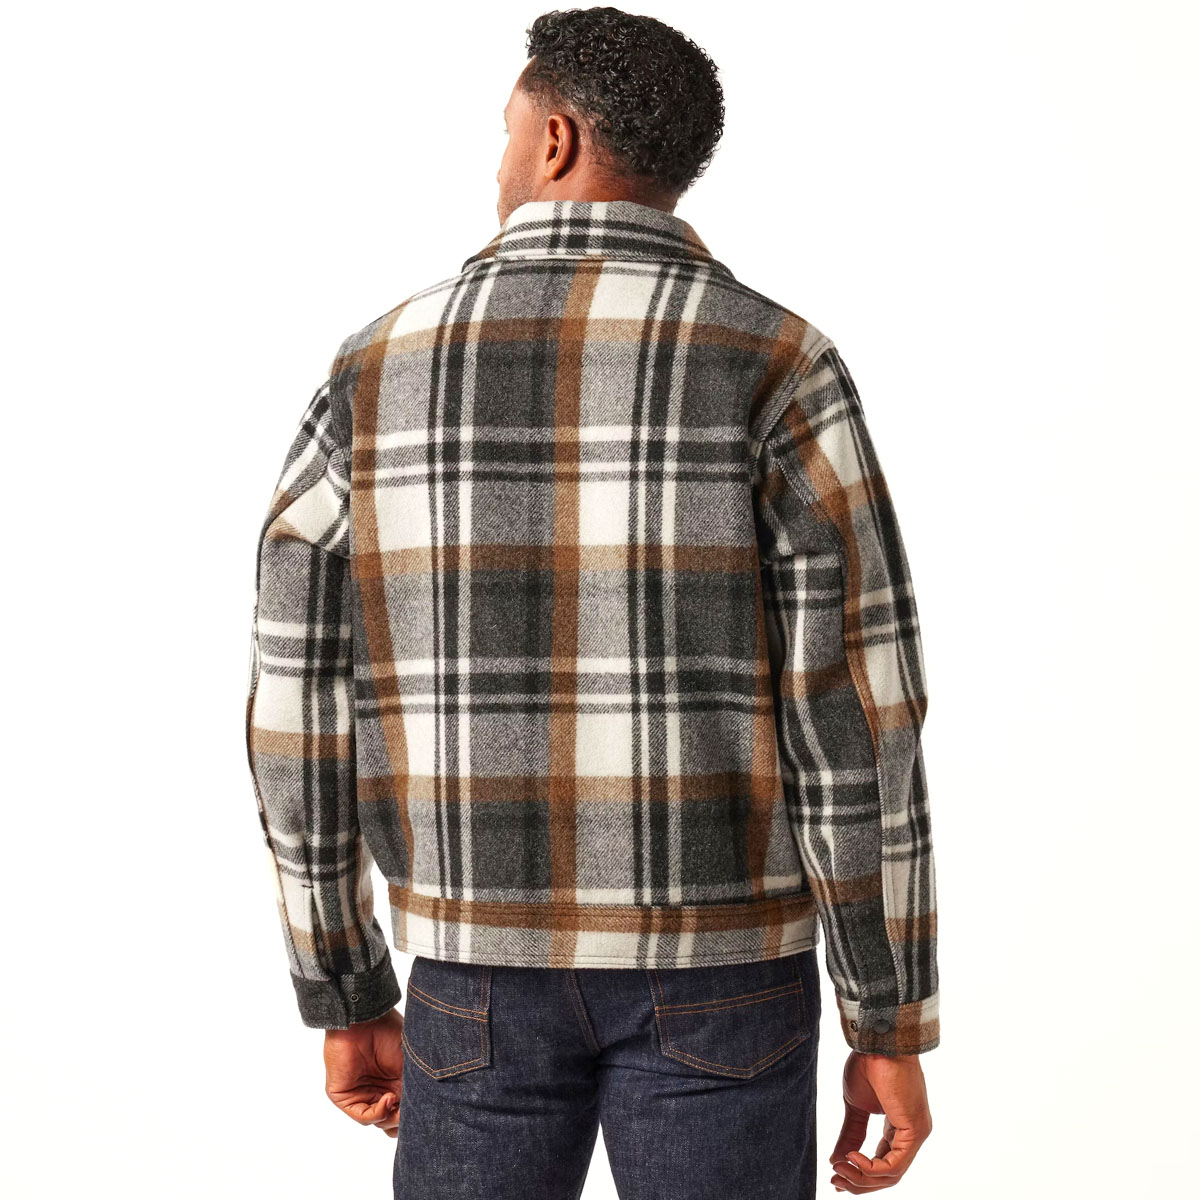 Filson Mackinaw Wool Work Jacket Blue Coal/Copper Heather, this classic jacket is a true tool for every outdoorsman.